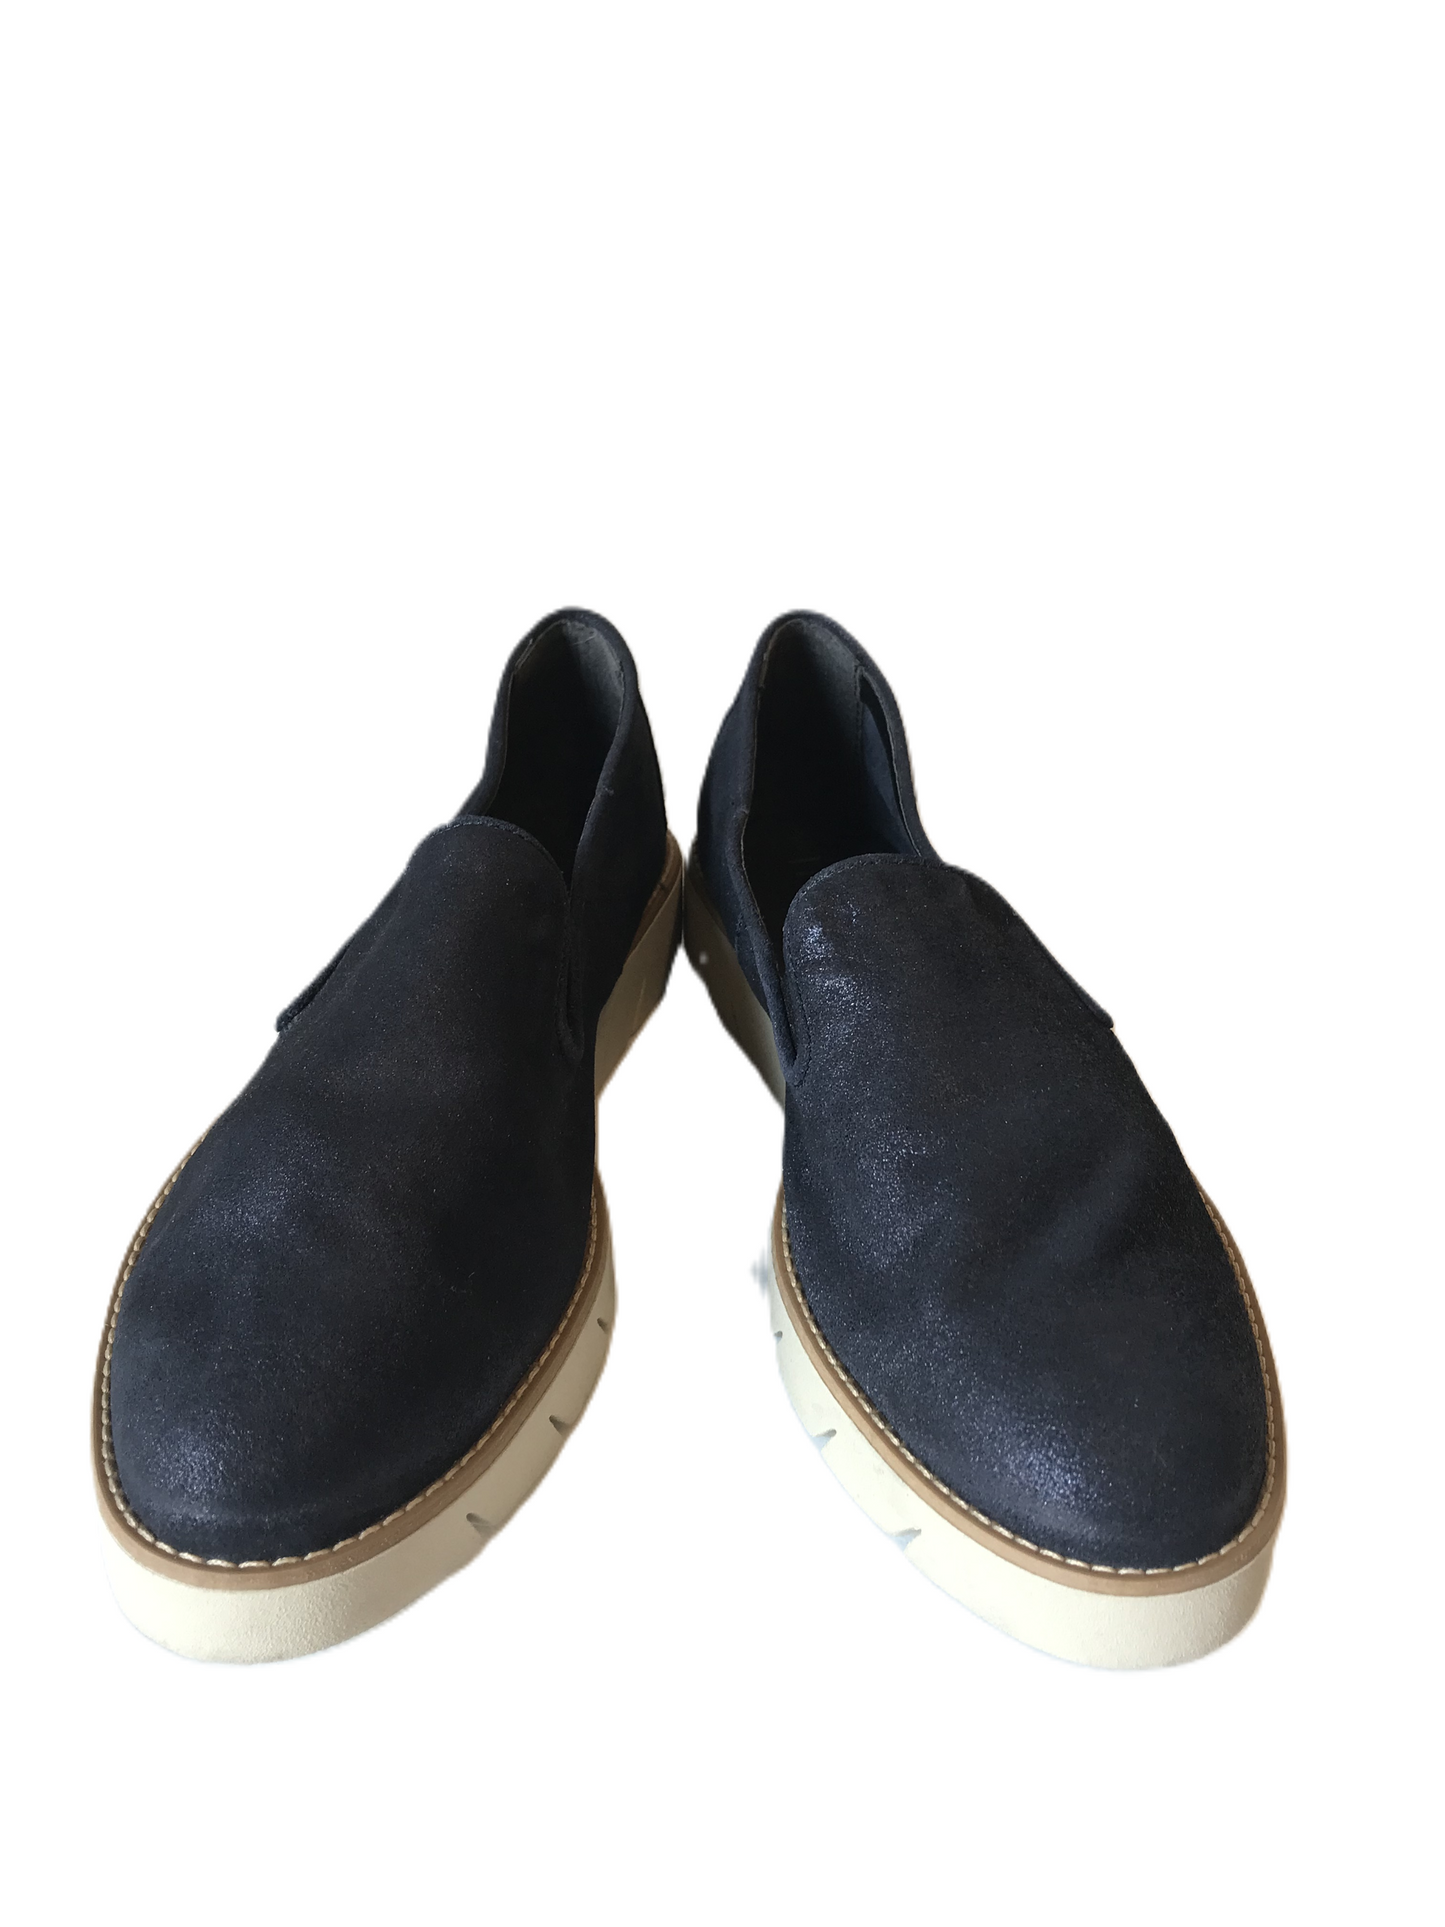 Navy Shoes Flats By The Flexx Size: 10